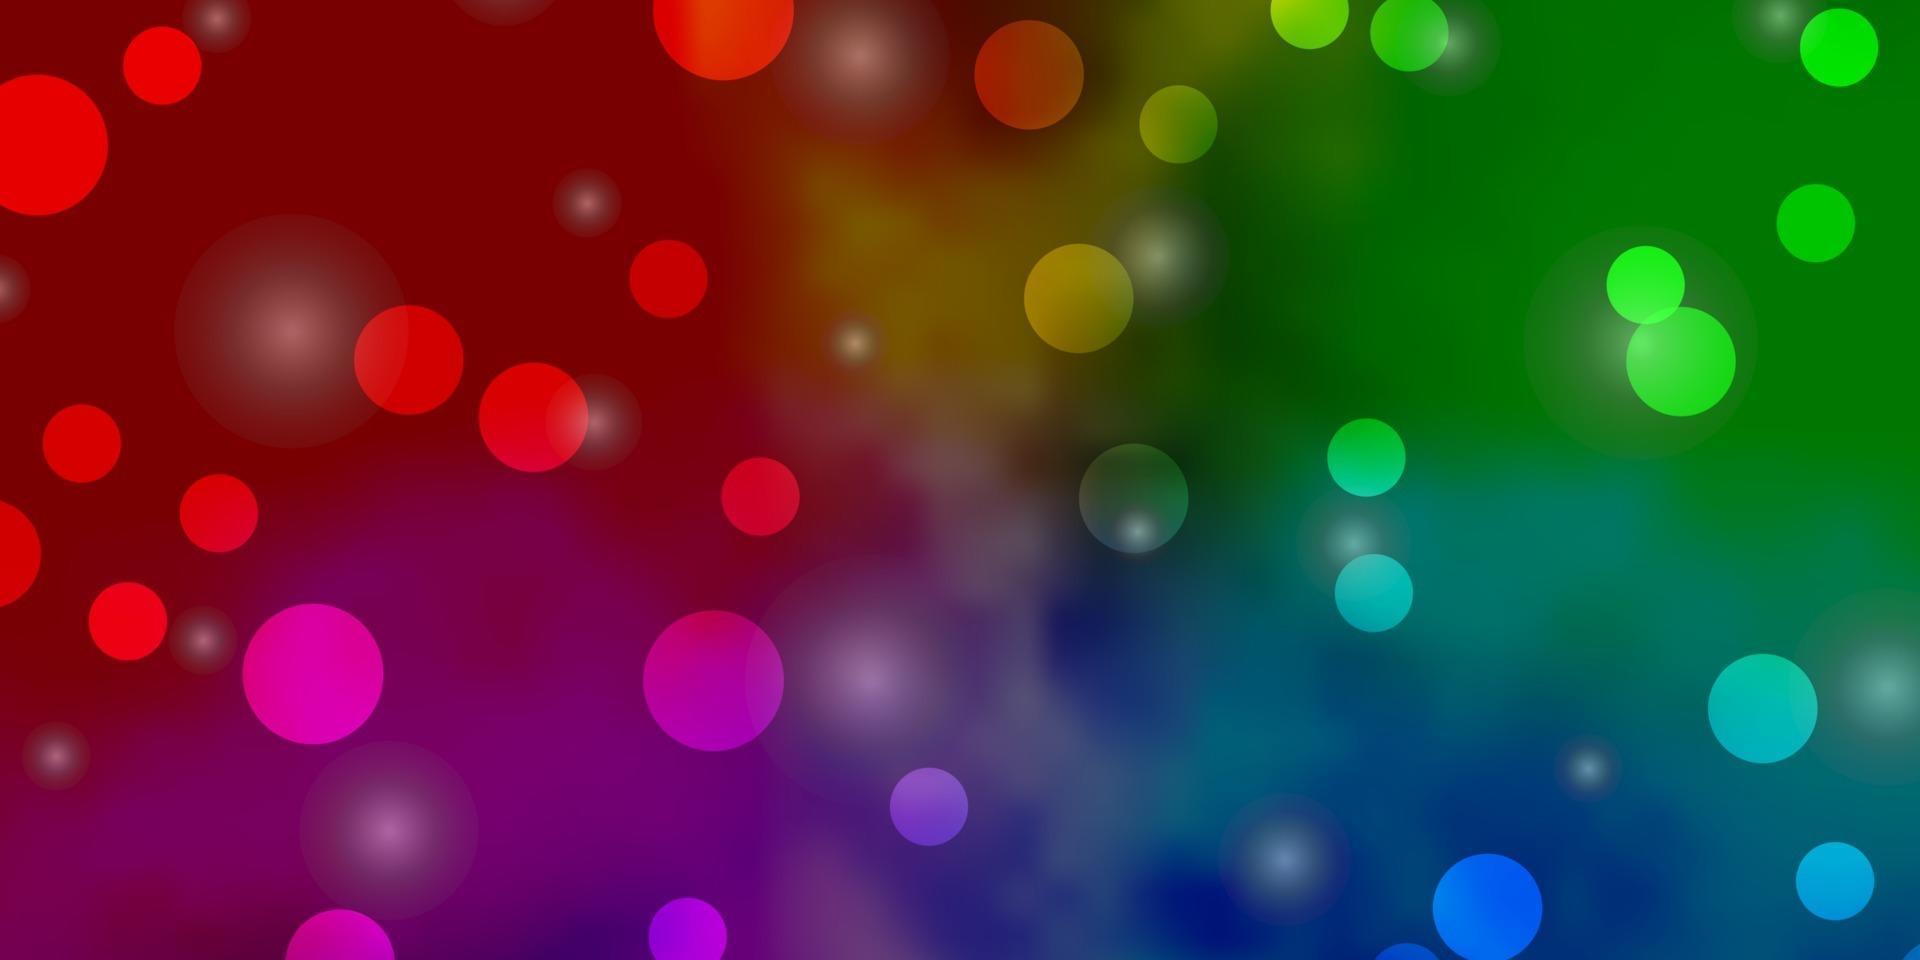 Light Multicolor vector template with circles, stars.